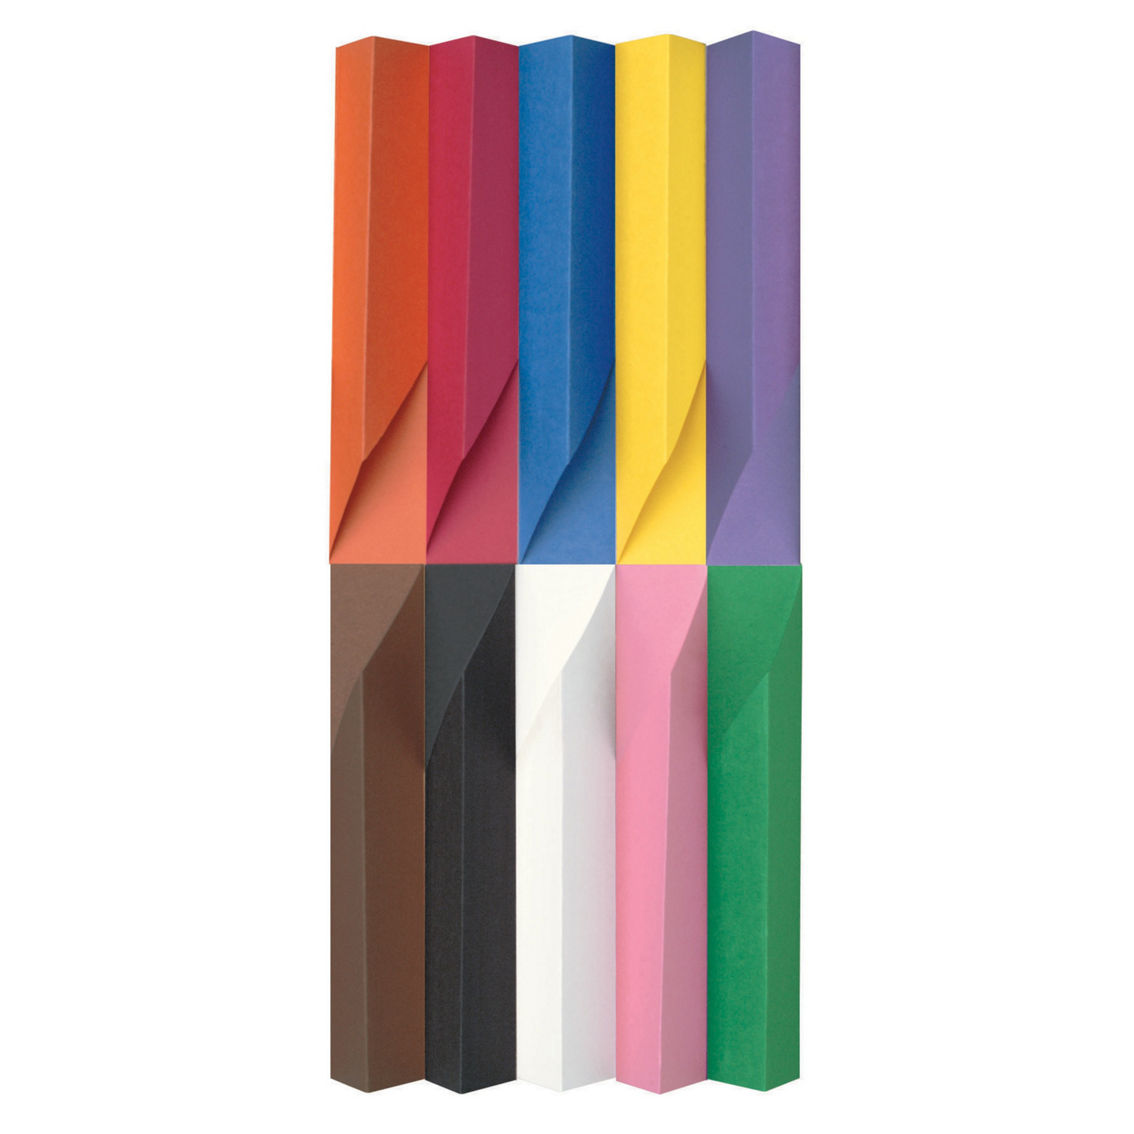 Prang® Construction Paper, 10 Assorted Colors, 50 Sheets Per Pack, 10 Packs - Image 2 of 5